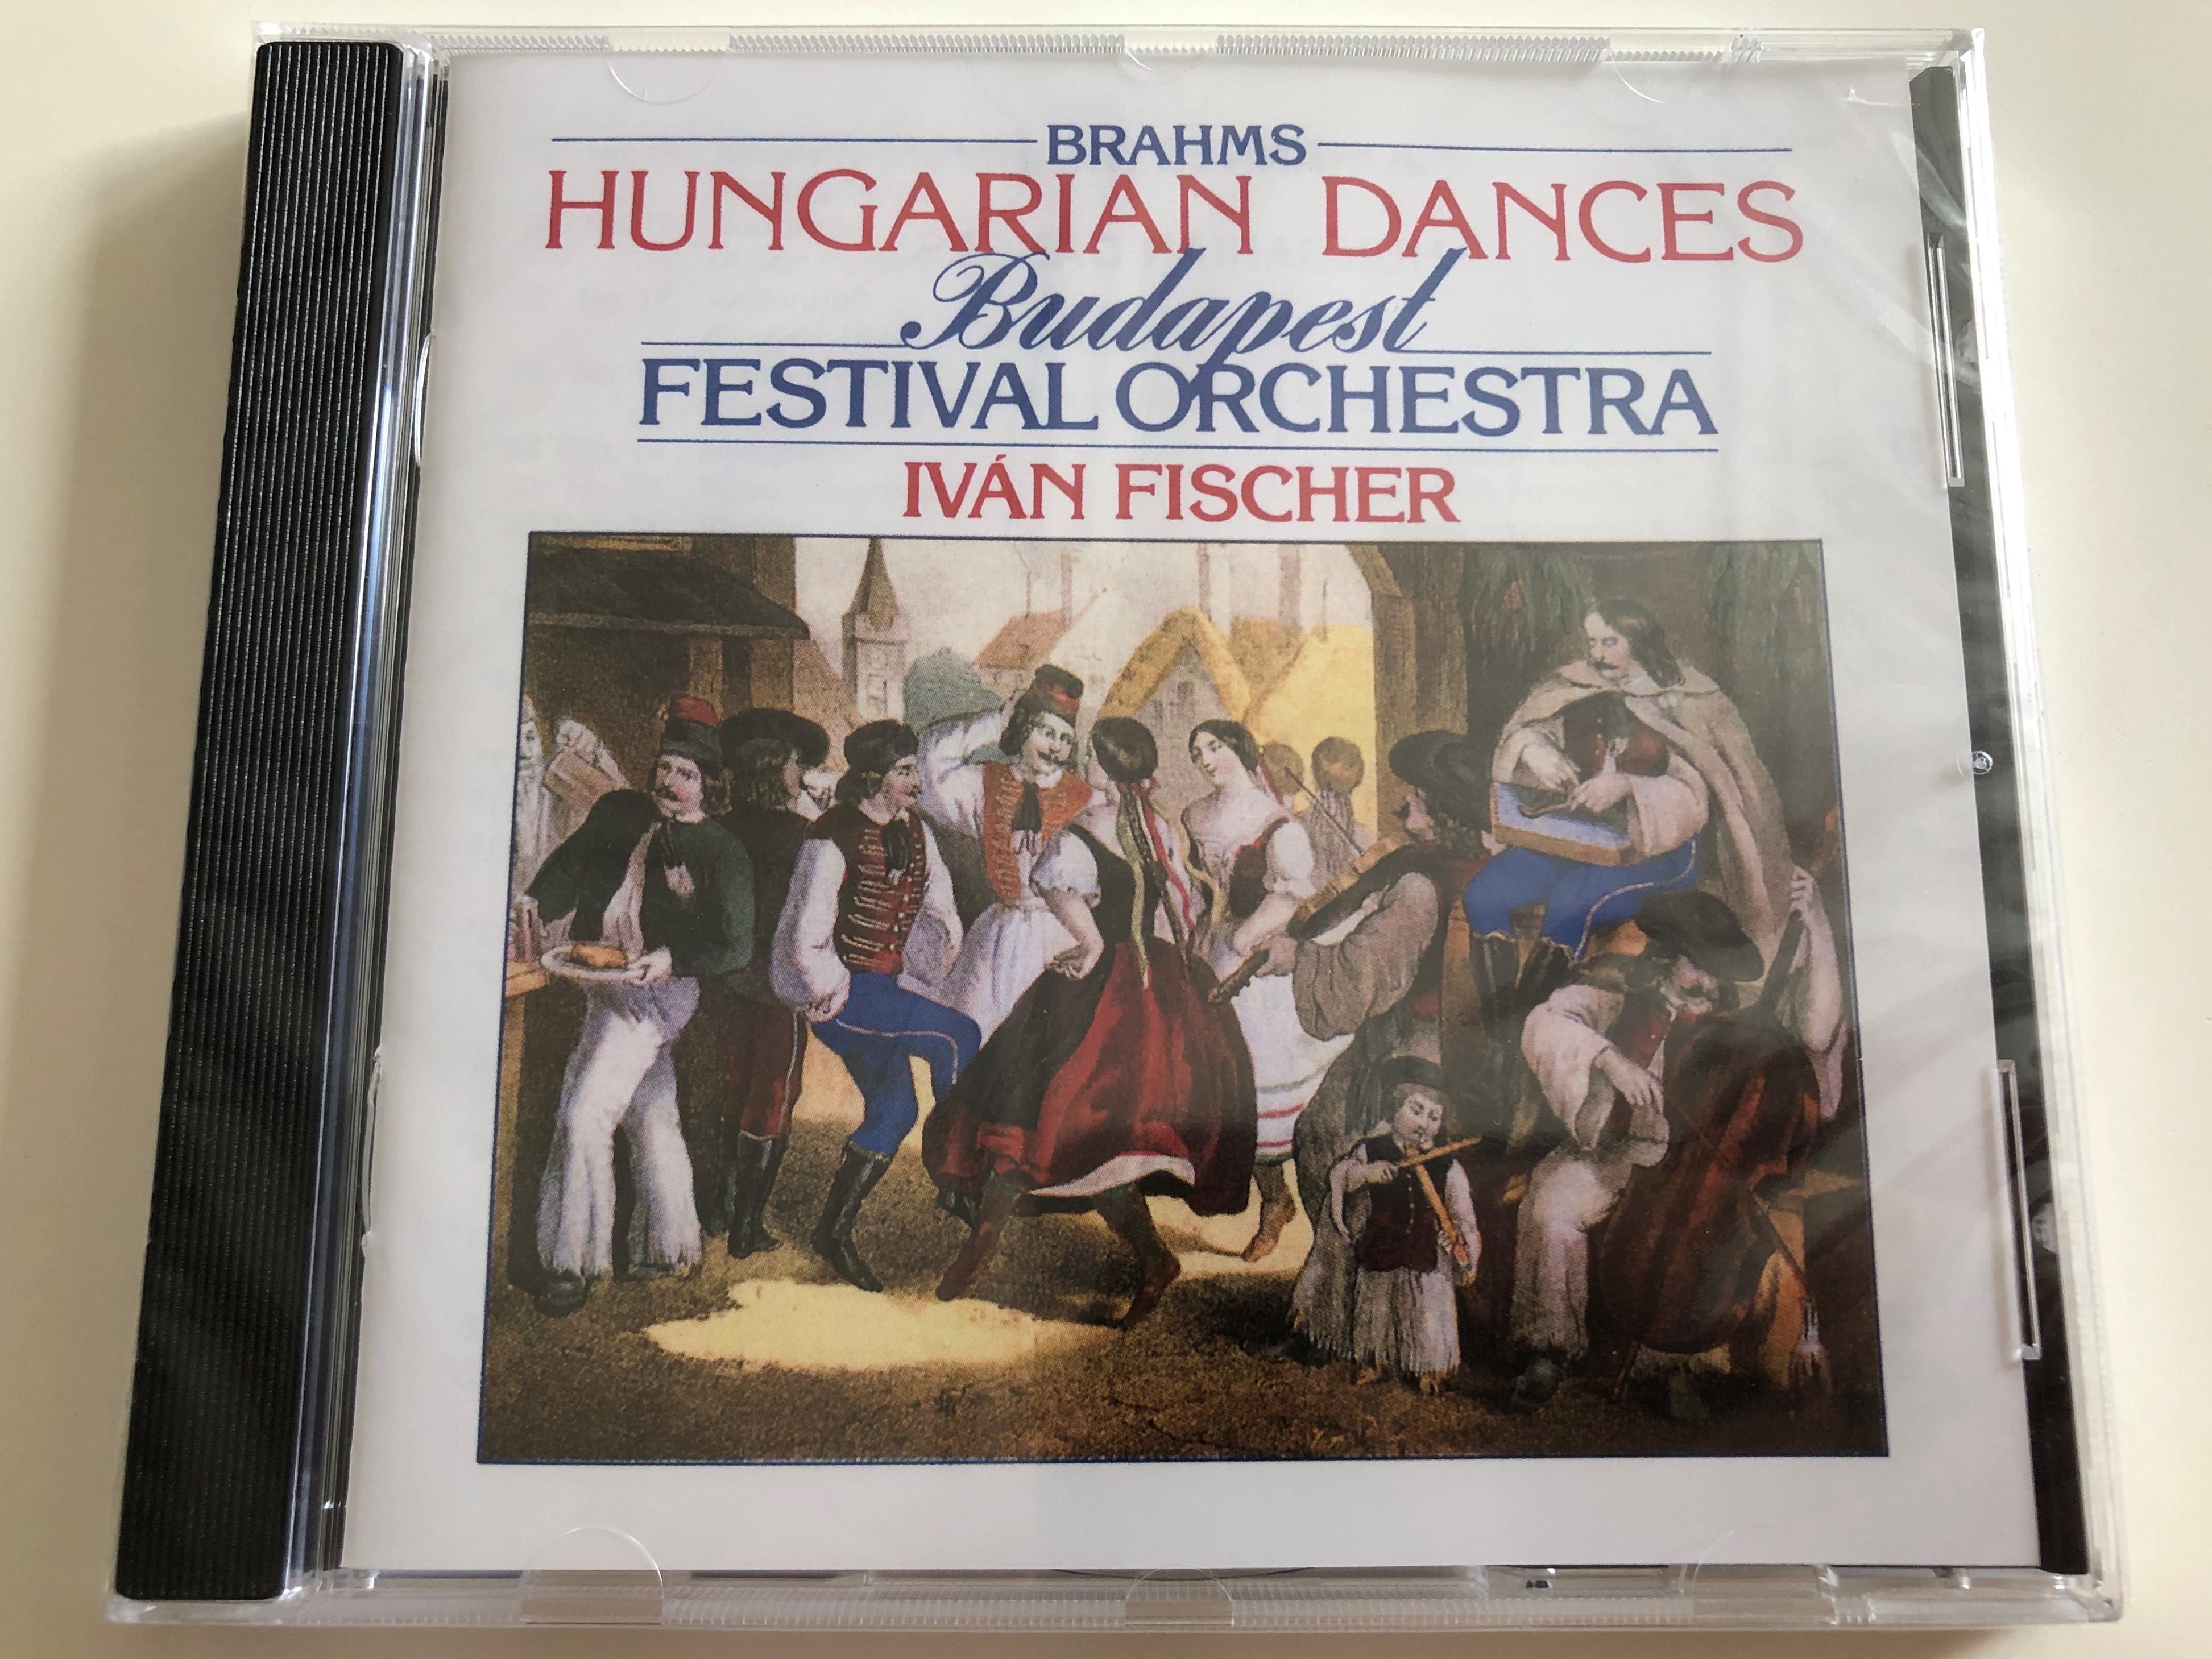 brahms-hungarian-dances-no.s-1-21-audio-cd-budapest-festival-orchestra-conducted-by-iv-n-fischer-andr-s-keller-violin-k-lm-n-balogh-cymbal-hungaroton-1-.jpg